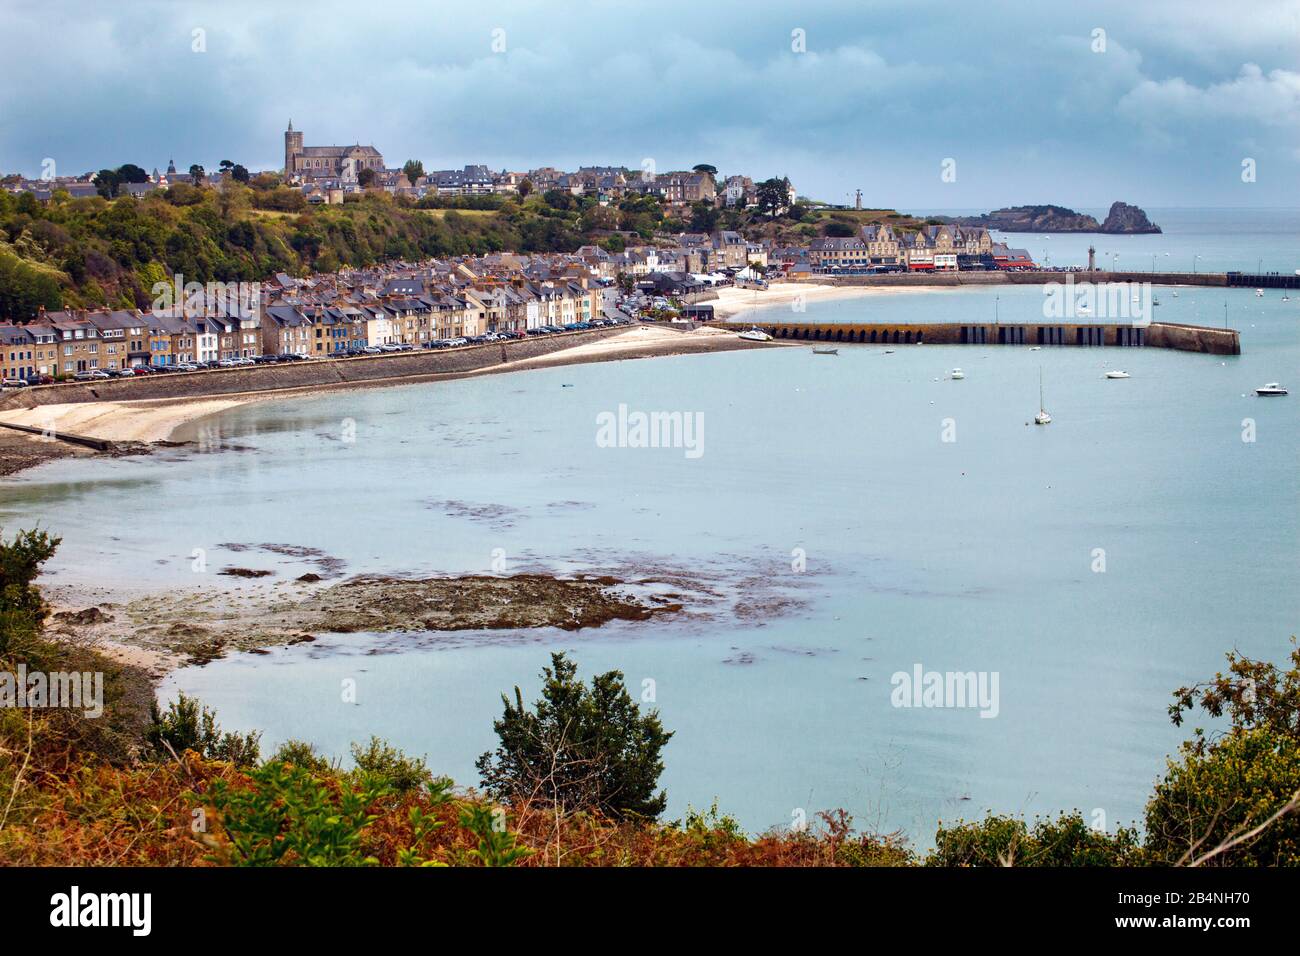 Cancale is a commune in northern Brittany in the Ille-et-Vilaine department. It is located in the northwest of the Bay of Mont-Saint-Michel, on the Côte d'Émeraude. View of the waterfront at low tide. Stock Photo